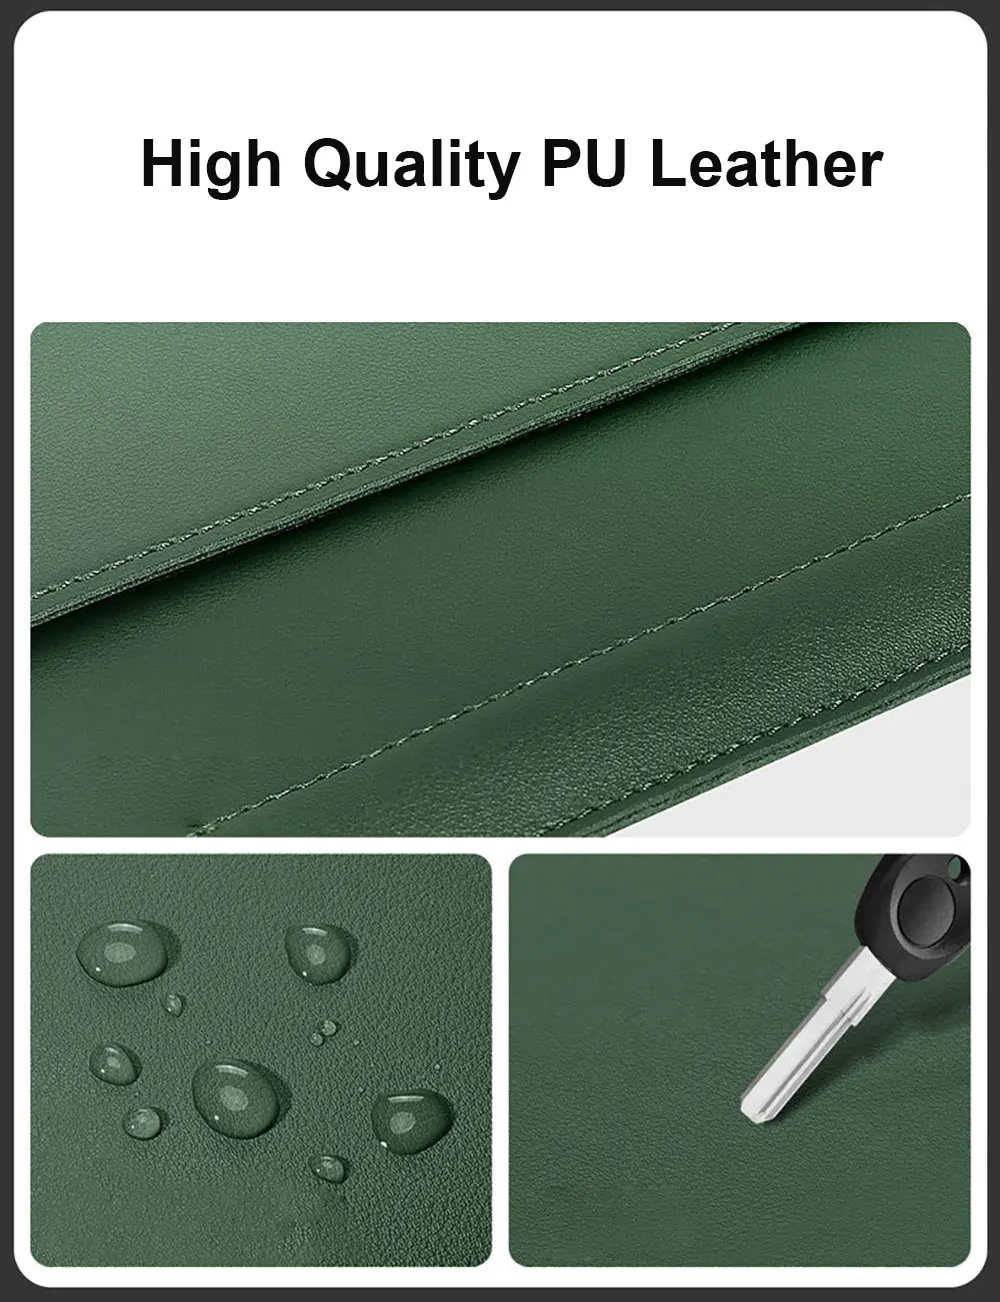 Pu Leather Bag Laptop Mouse Pad Adjustable Tablet Holder 3In1 Simple Bags Handheld Stand Computer Backpack Office Dnb29 Laudtec manufacture